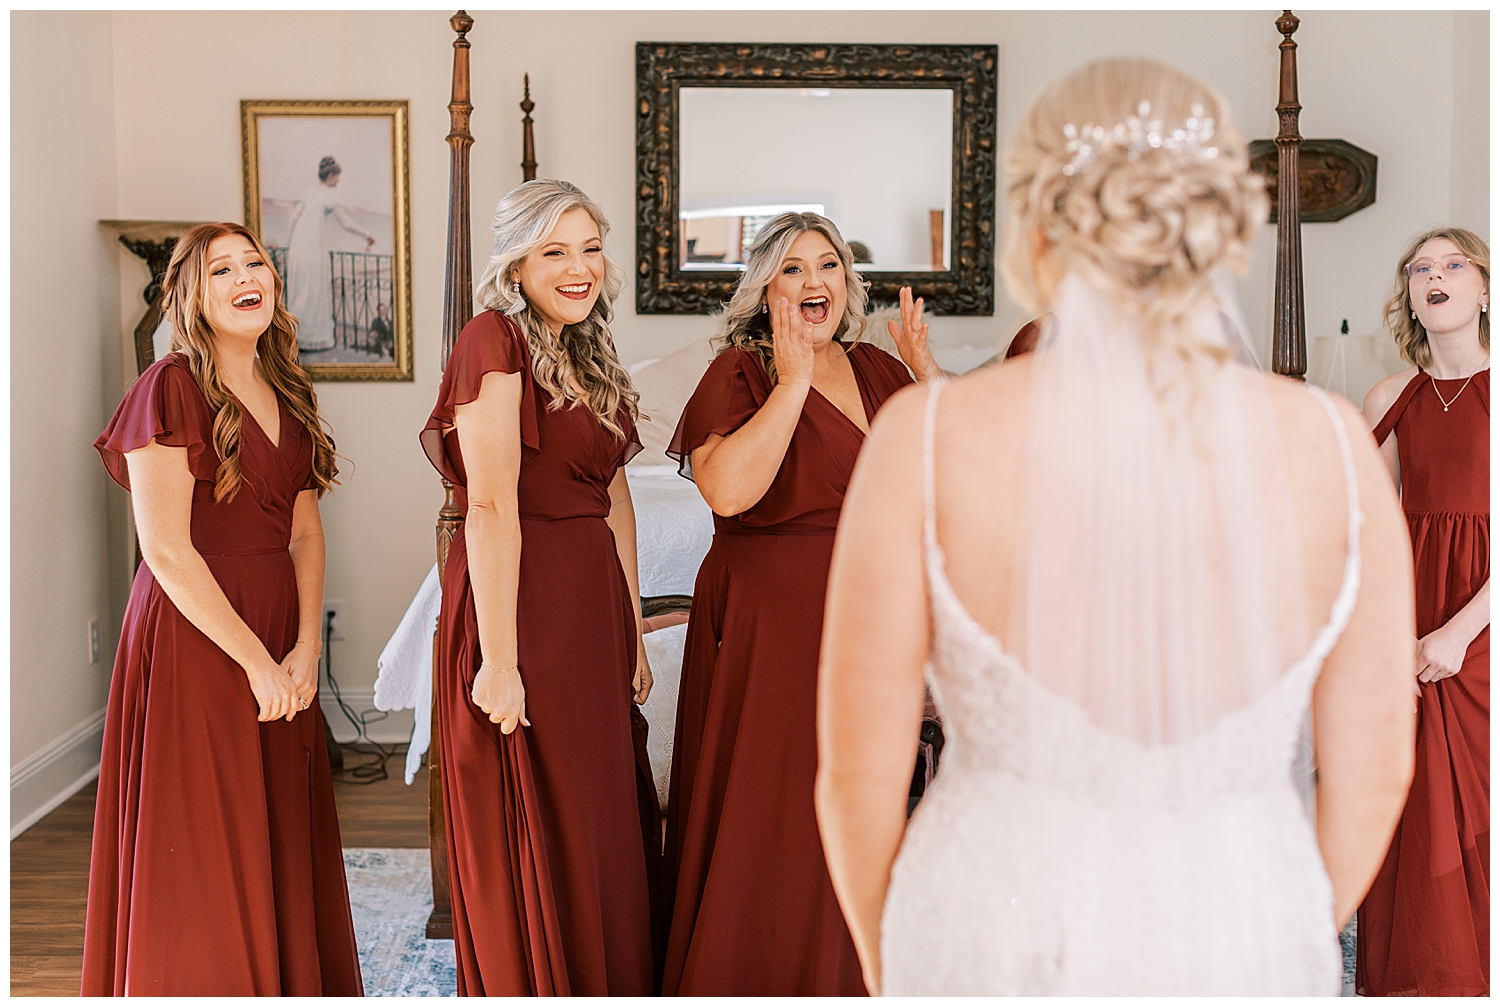 The bridesmaids are shocked.